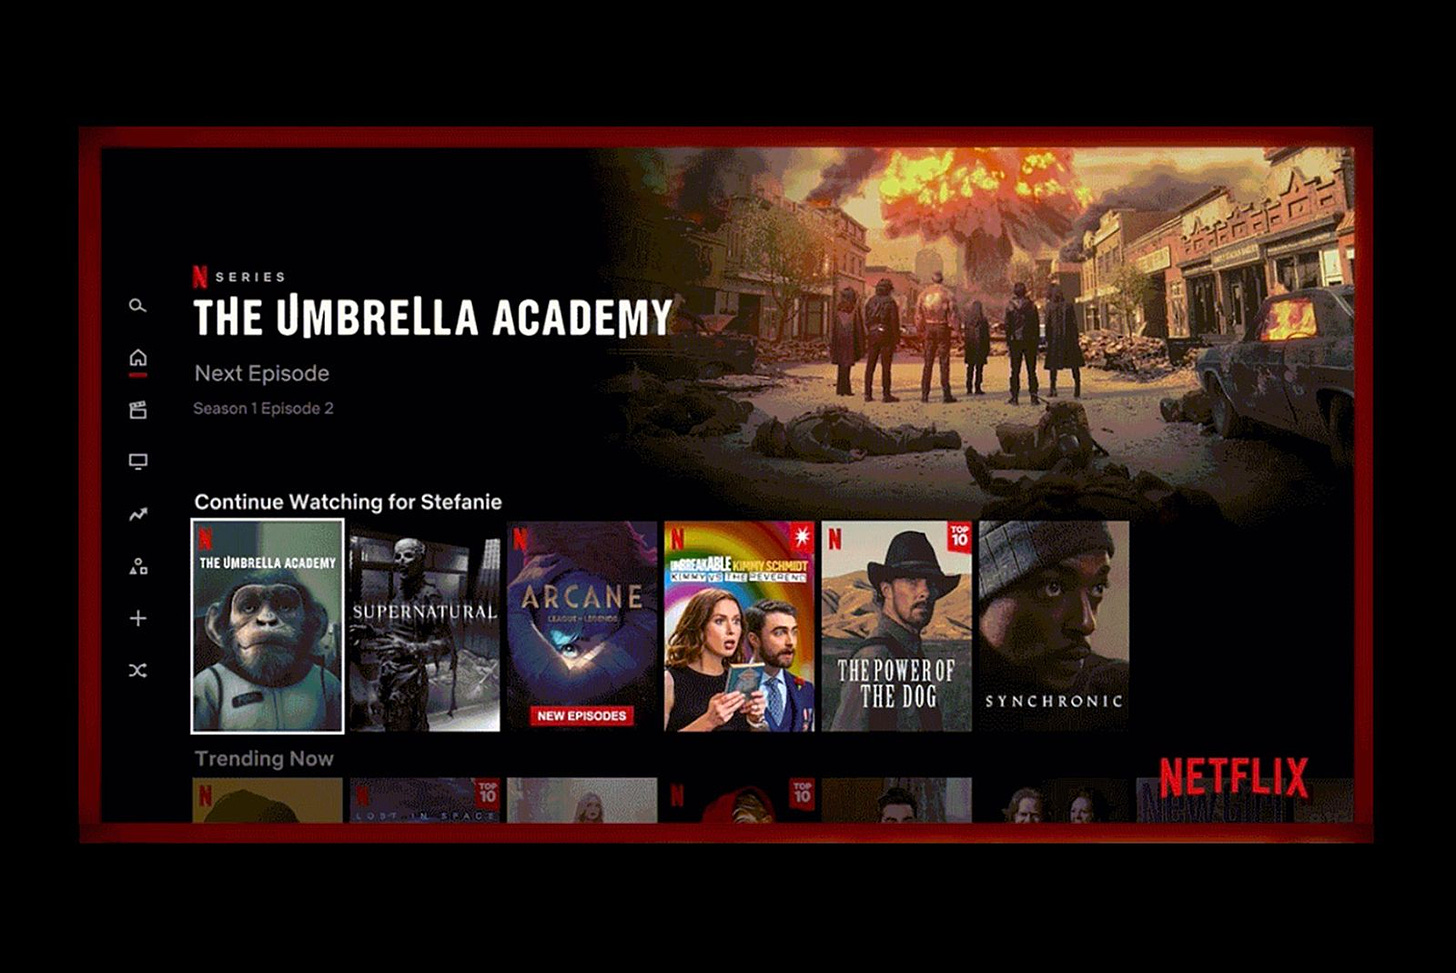 How to remove movies from Netflix's 'continue watching' row